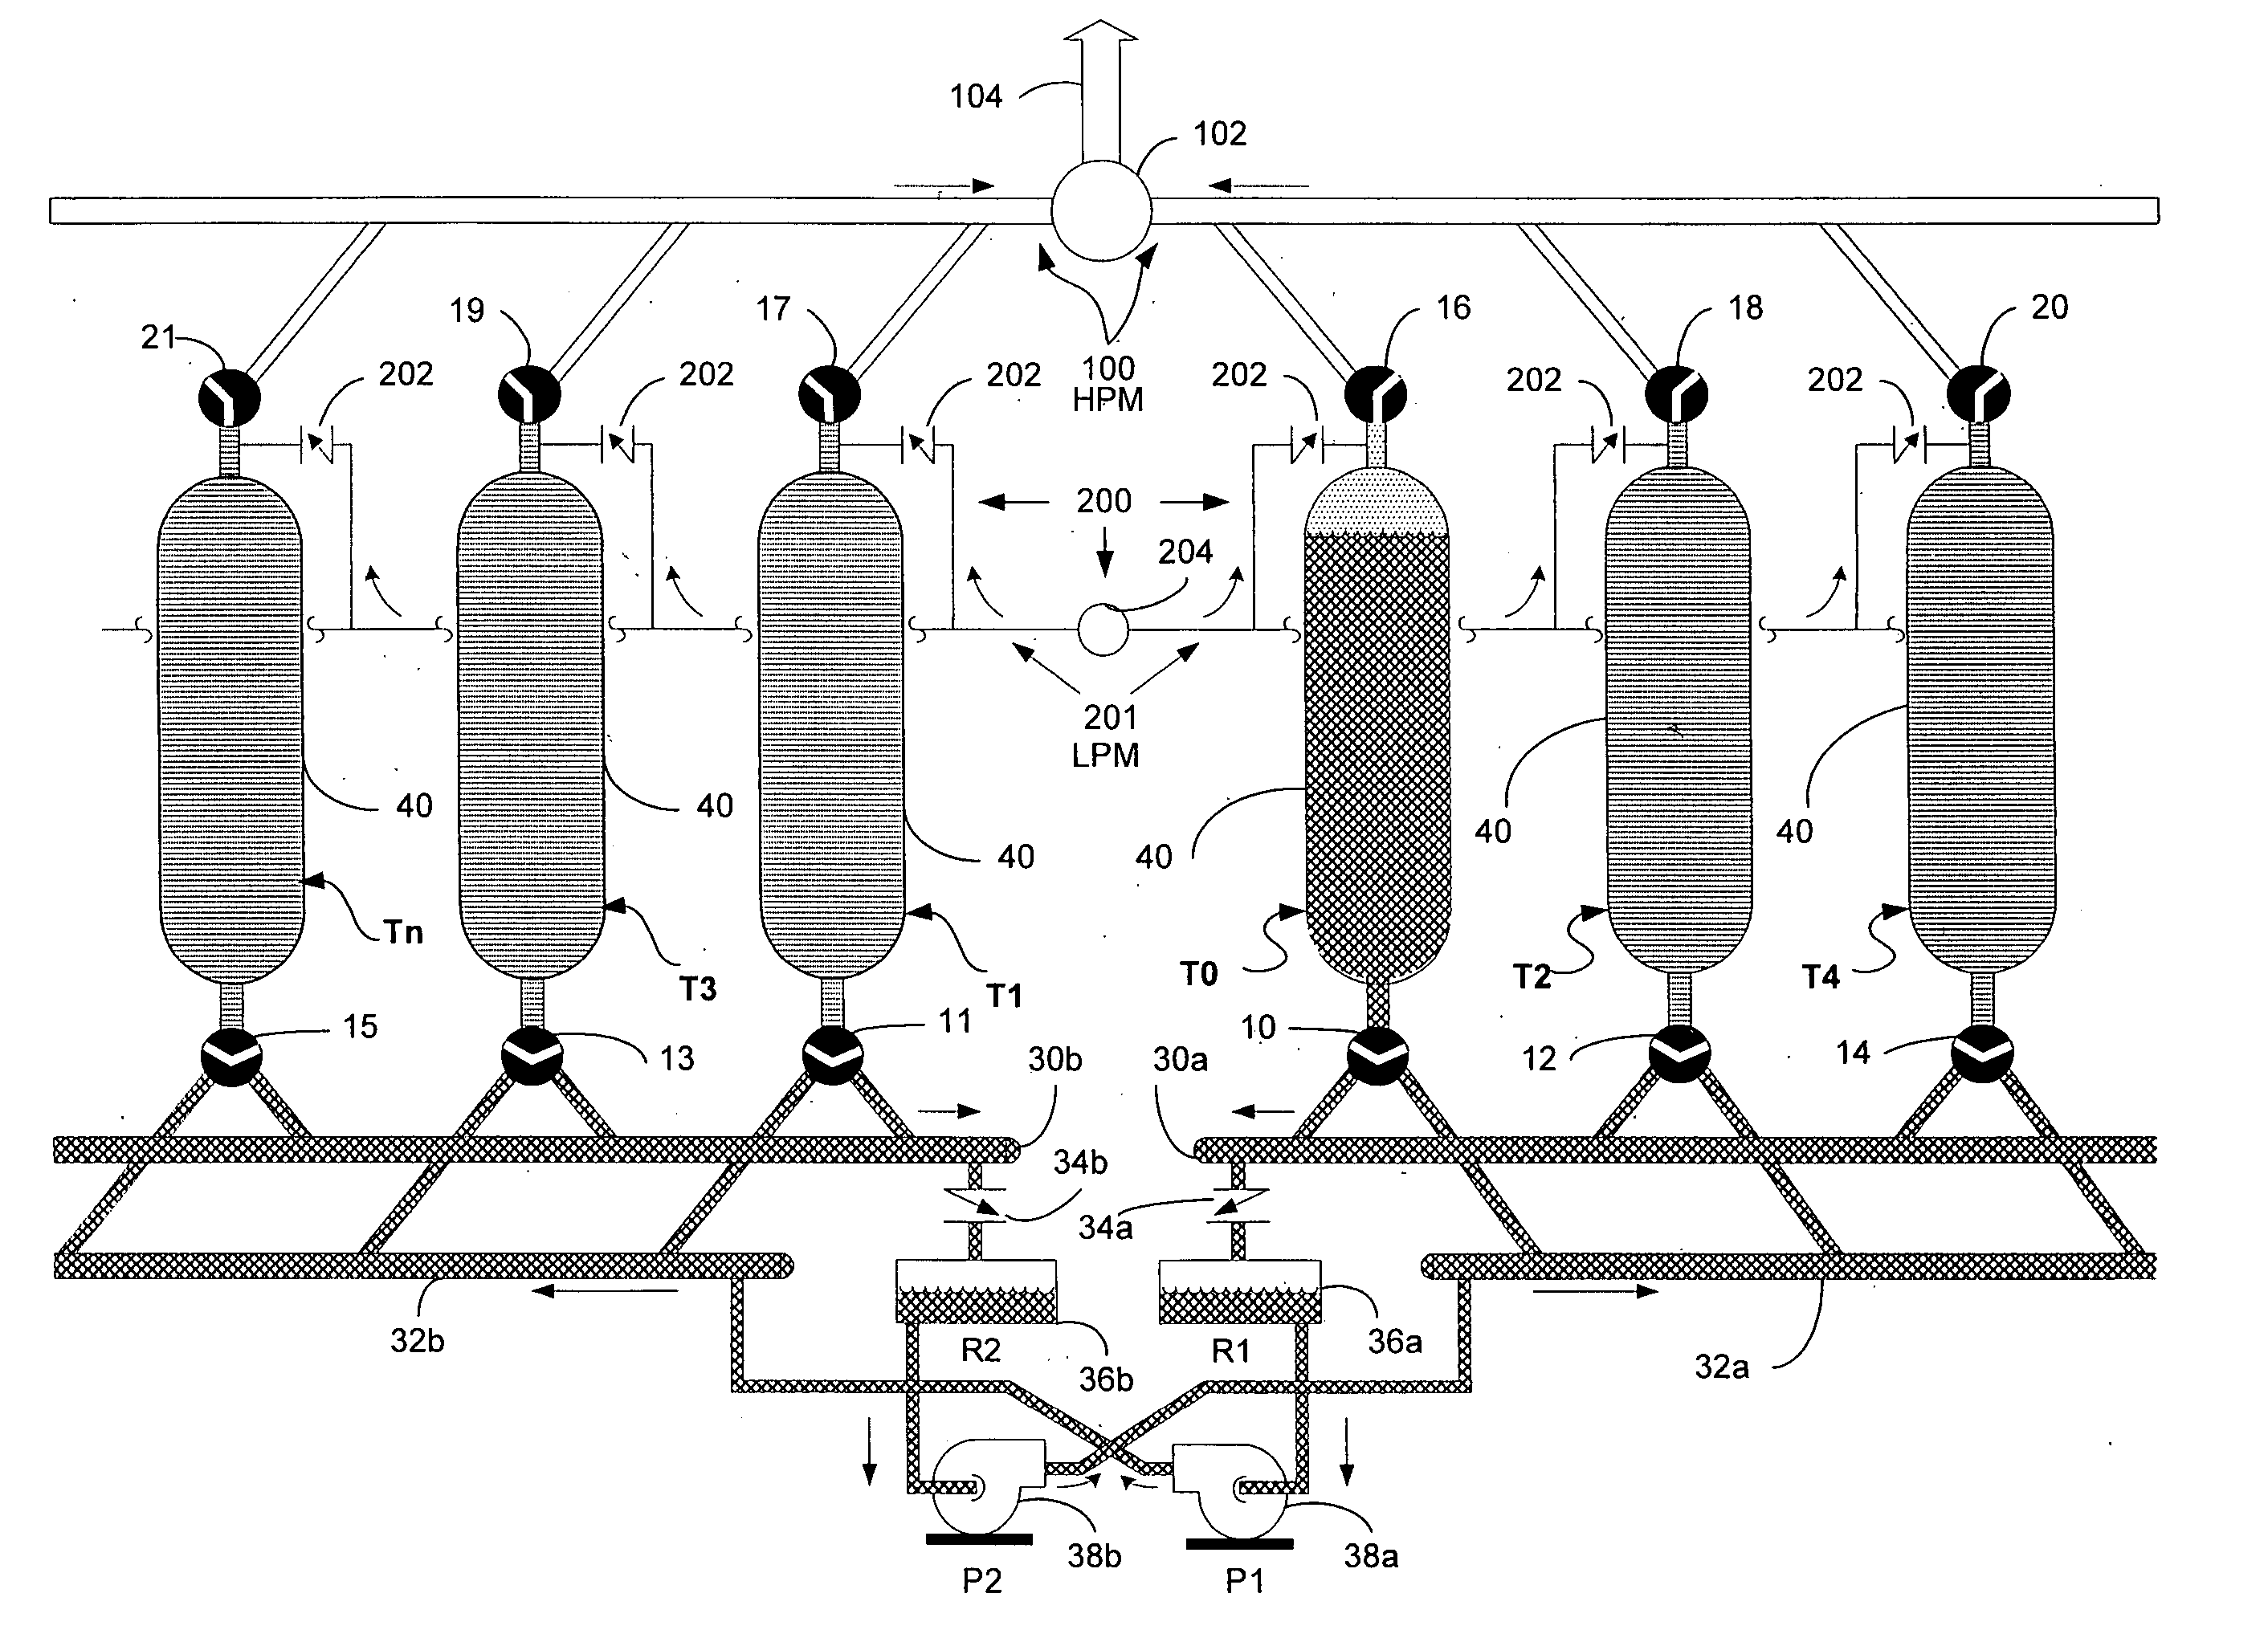 Liquid displacement shuttle system and method